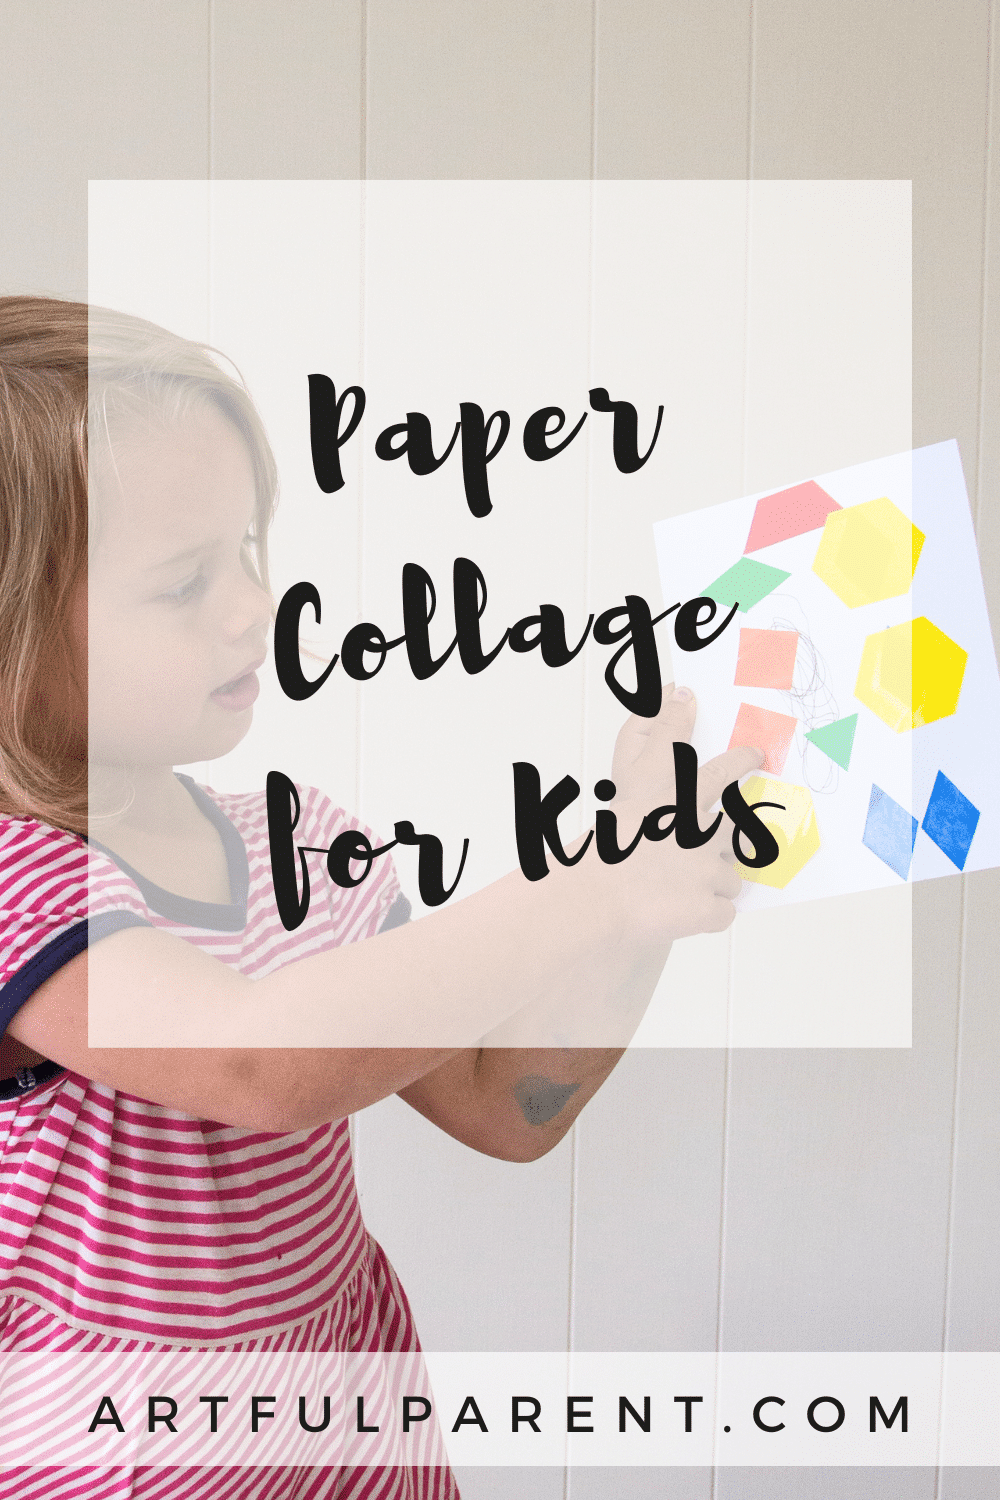 How to Make Paper Collage for Kids